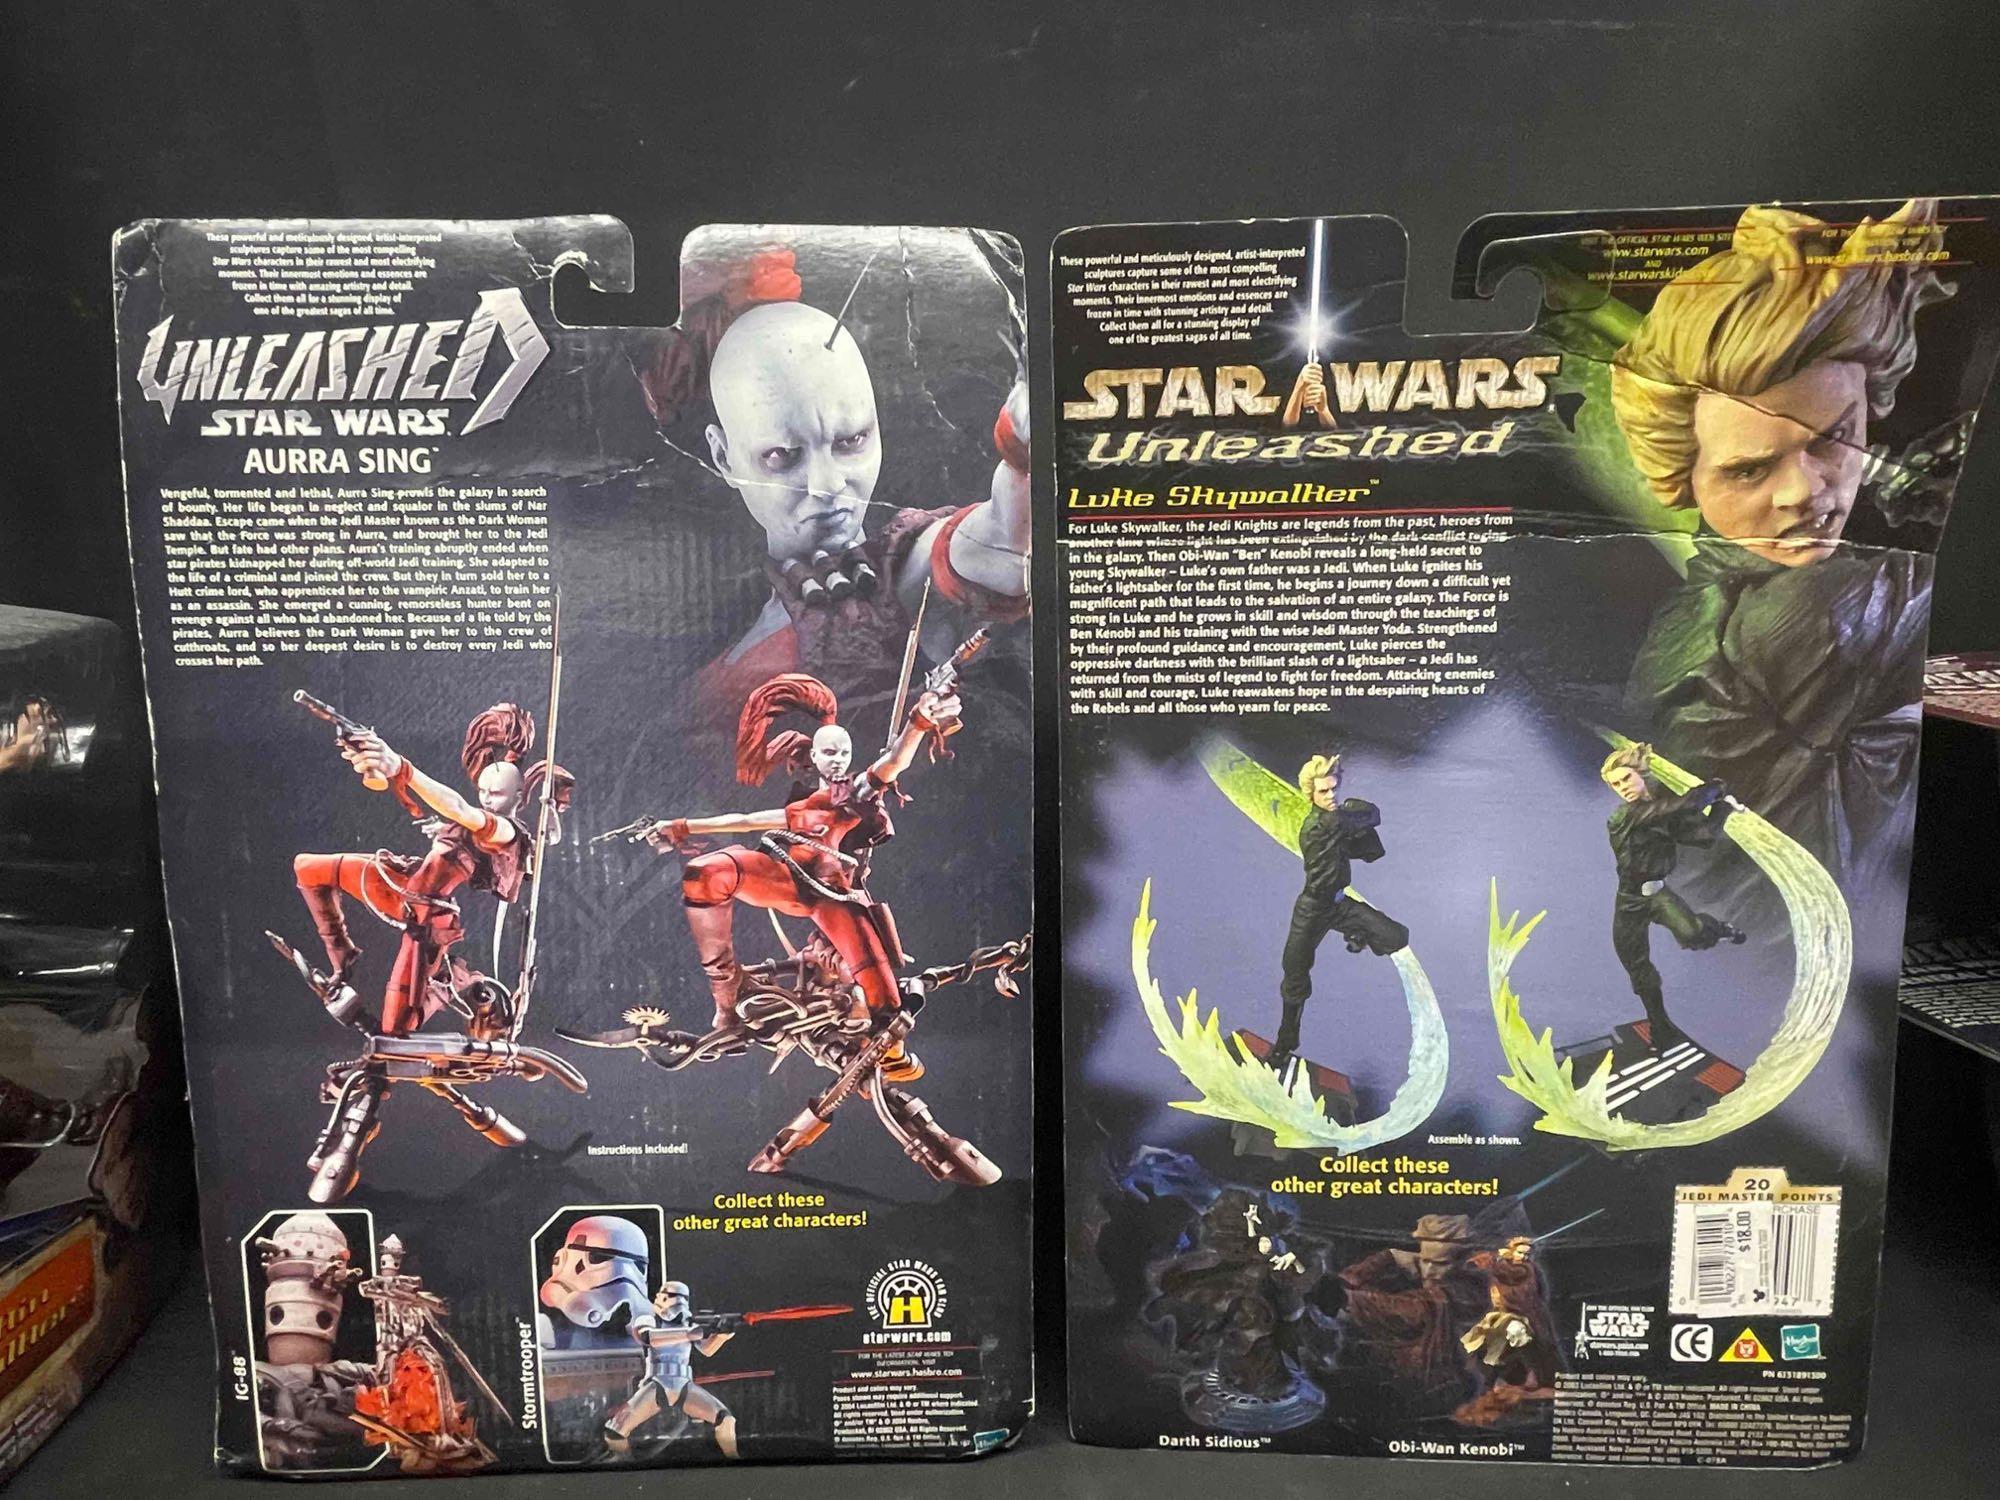 Star Wars Unleashed Action Figures / Statues. 2002-2005 Hasbro